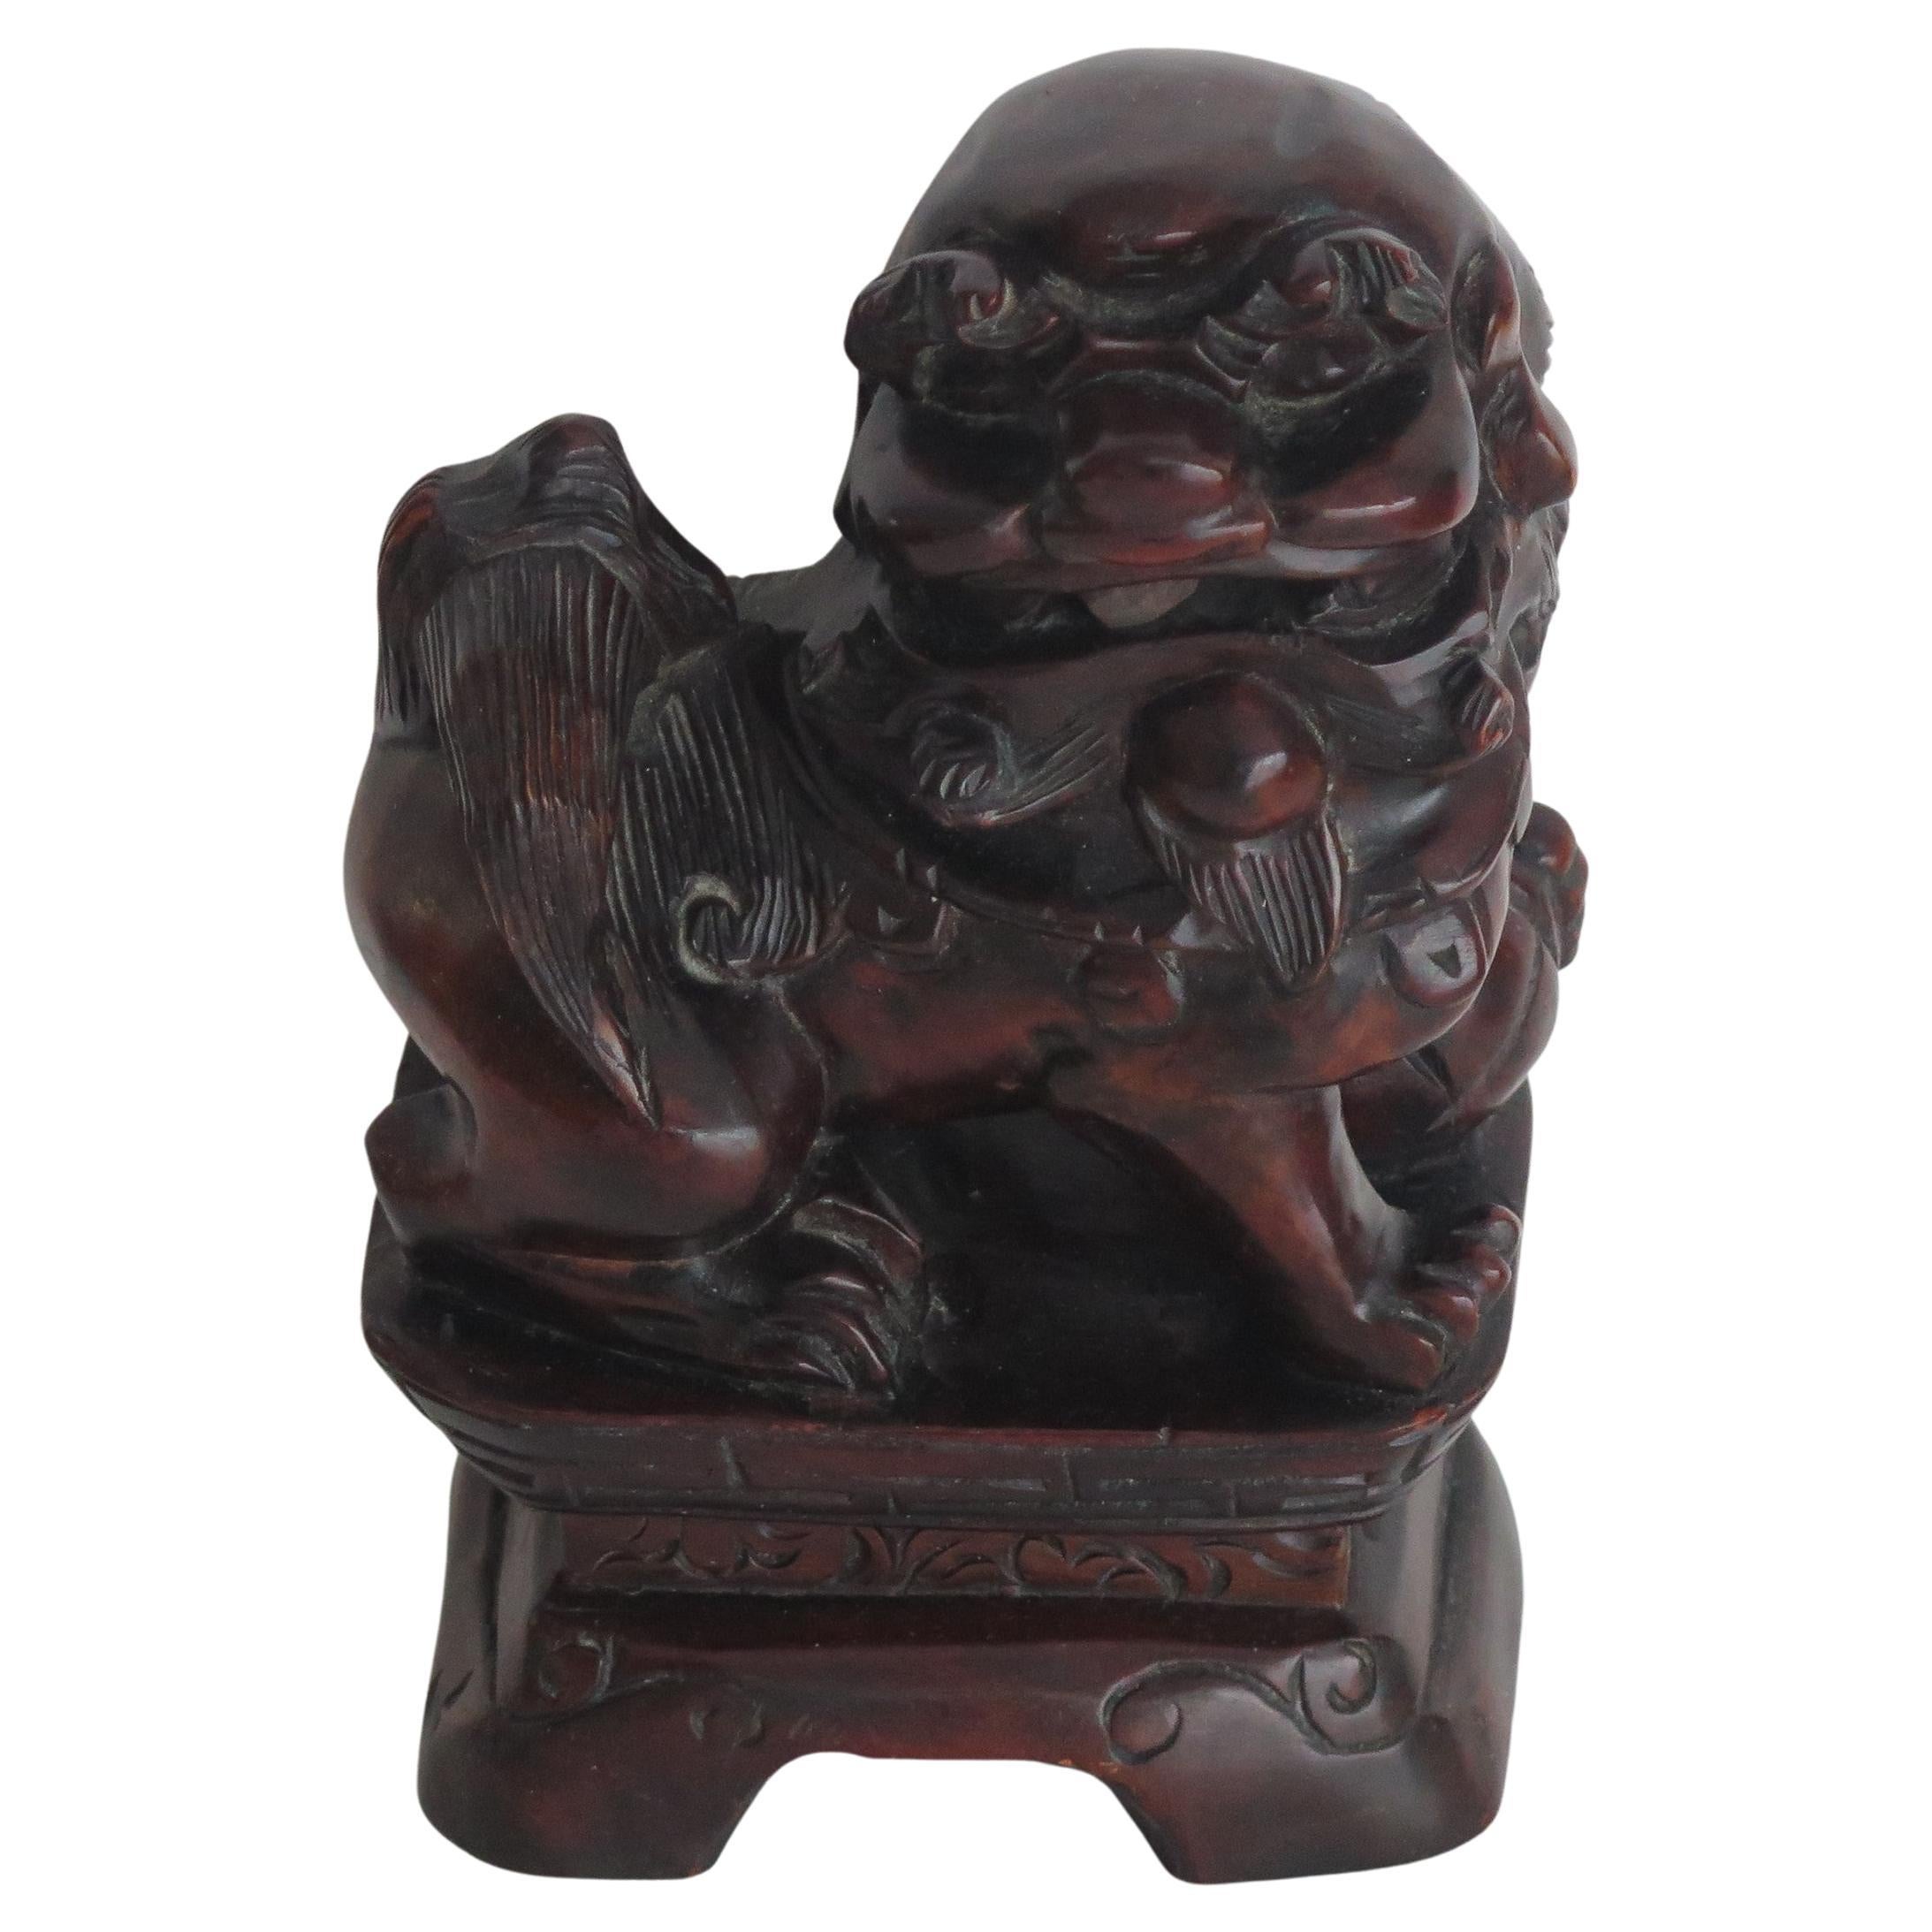 This is a good Chinese hardwood foo dog, sometimes called a temple lion that we date to the late Qing period, circa 1900.

The piece is hand carved as a fierce dog or lion sat on a rectangular plinth, with a brocade ball under its paw. 

The